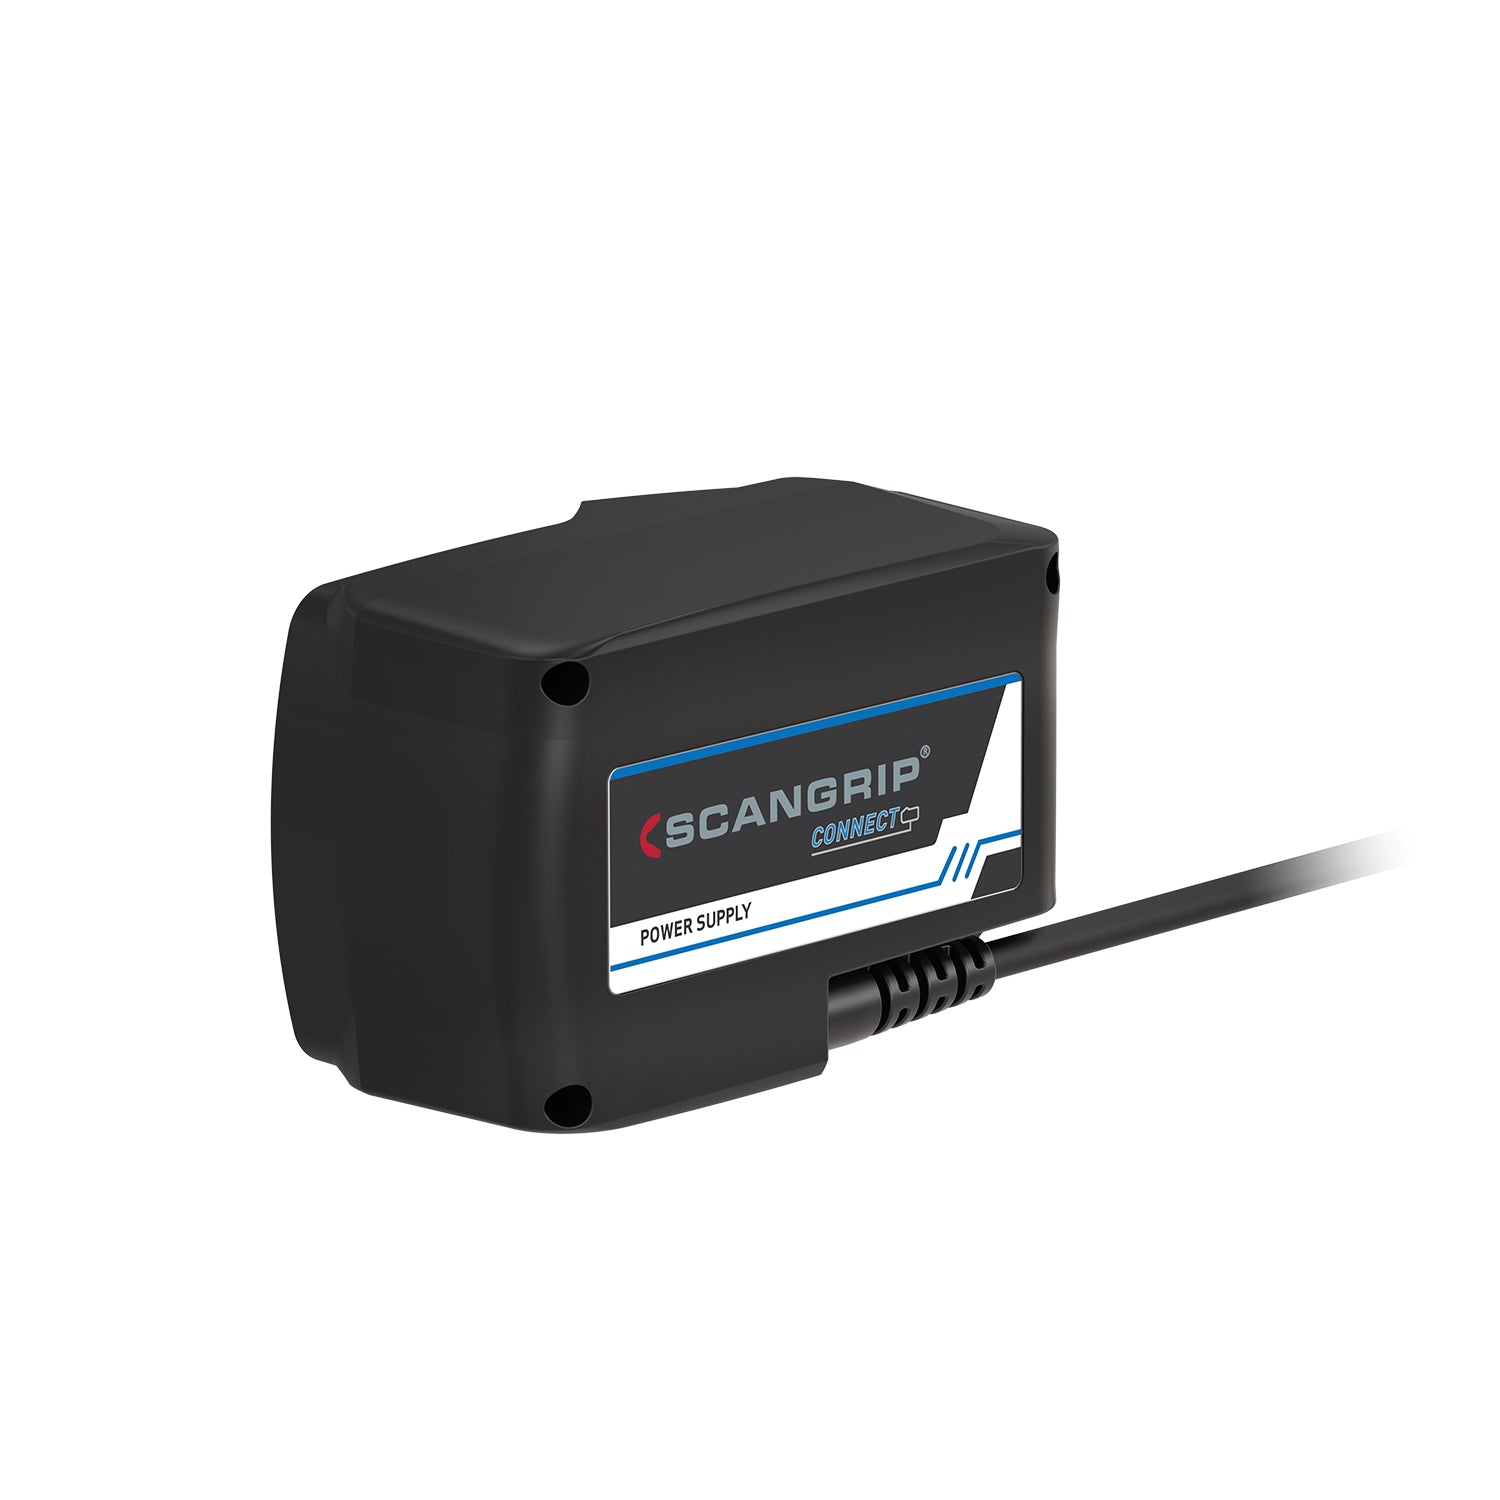 Scangrip Power Supply For Connect And CAS Work Lights